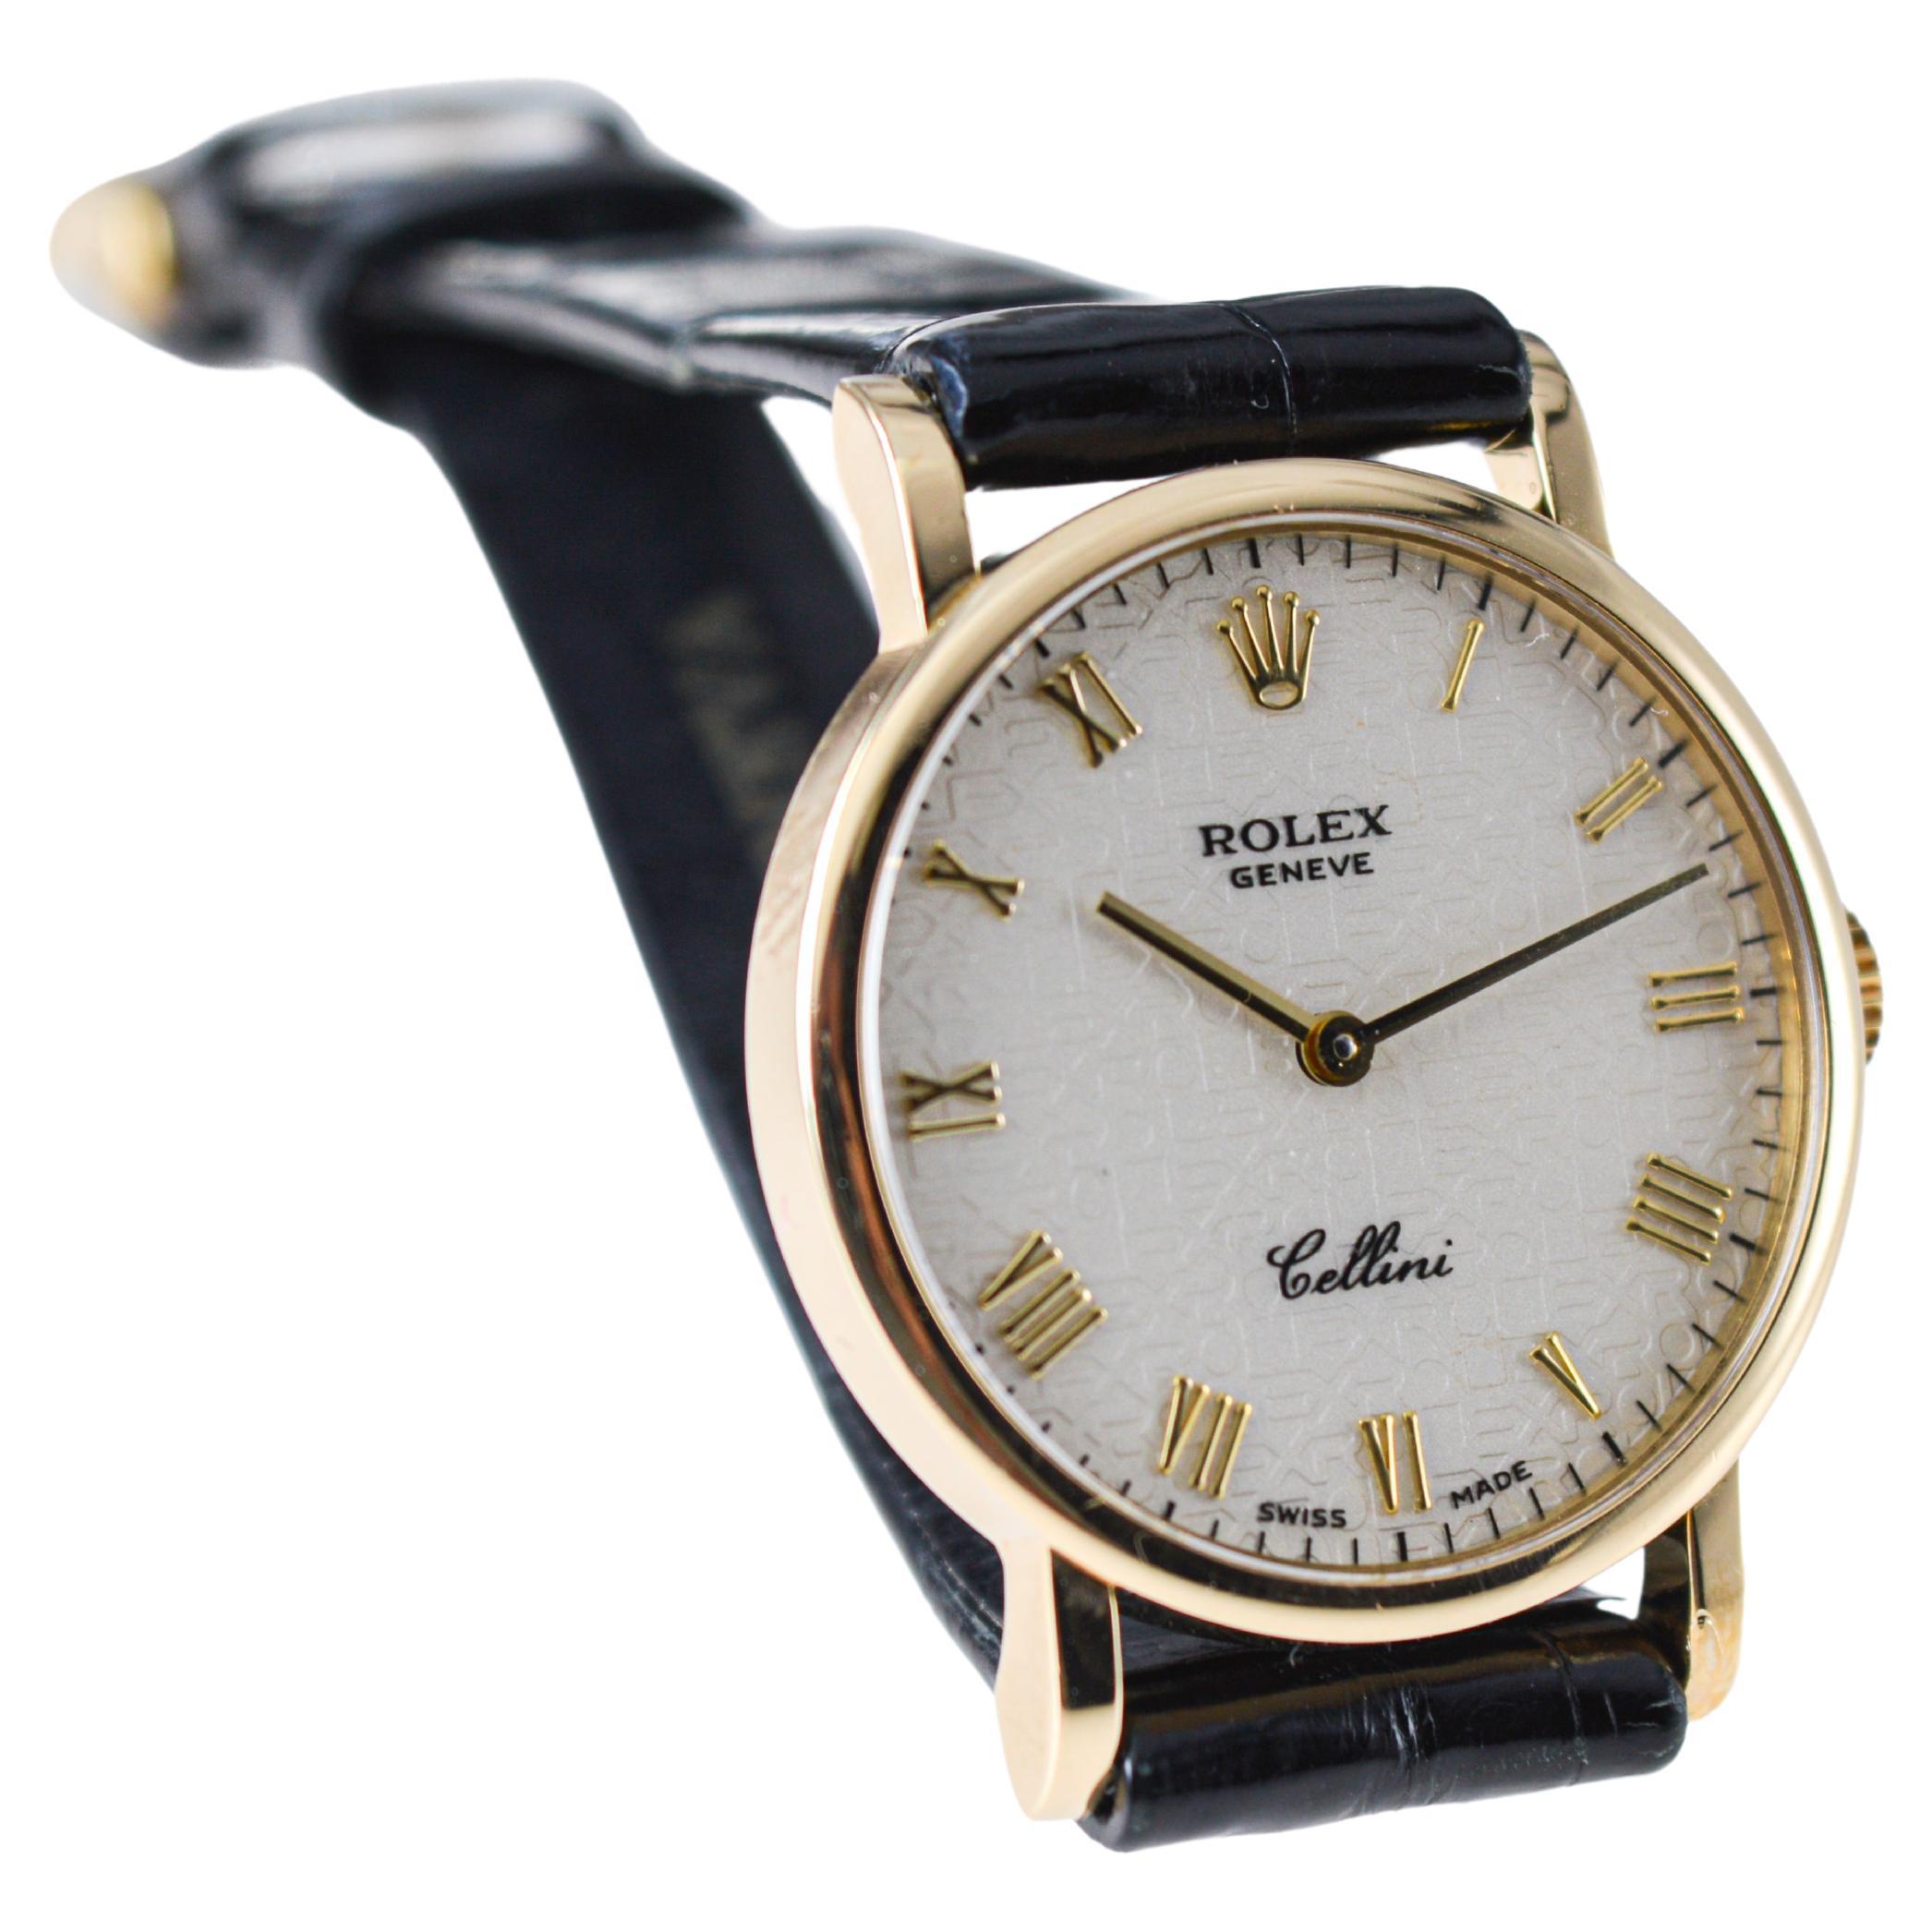  Rolex Cellini 18Kt. Solid Gold Ladies Watch with Original Strap and Buckle  3